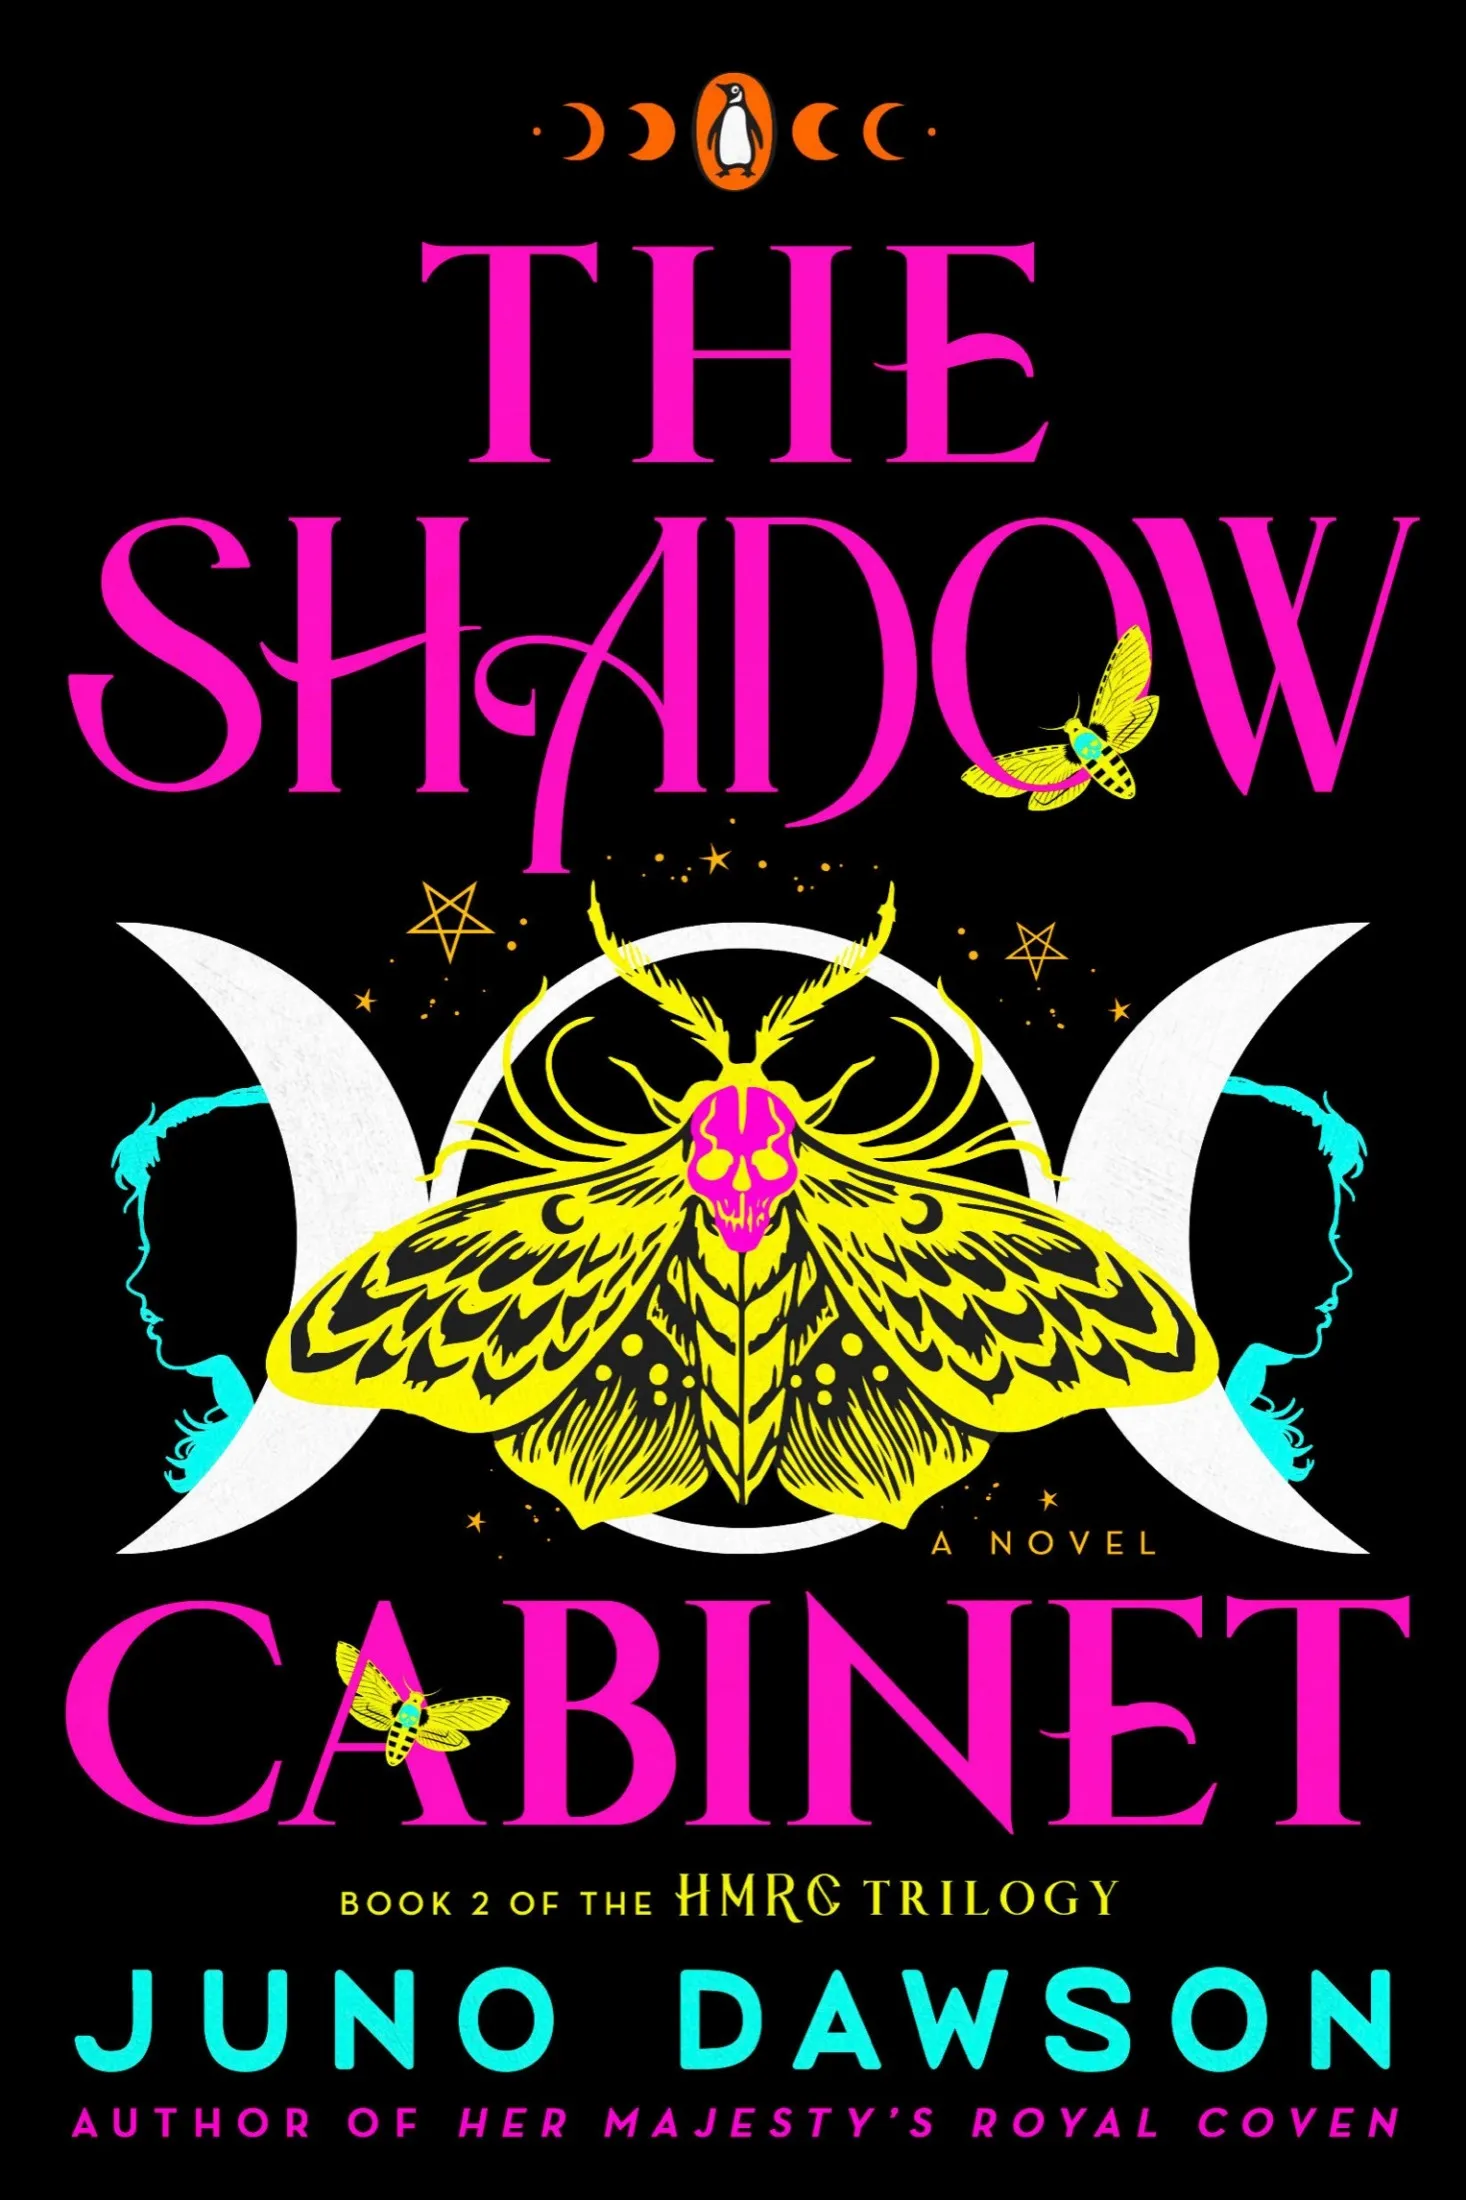 The Shadow Cabinet (Her Majesty's Royal Coven #2)